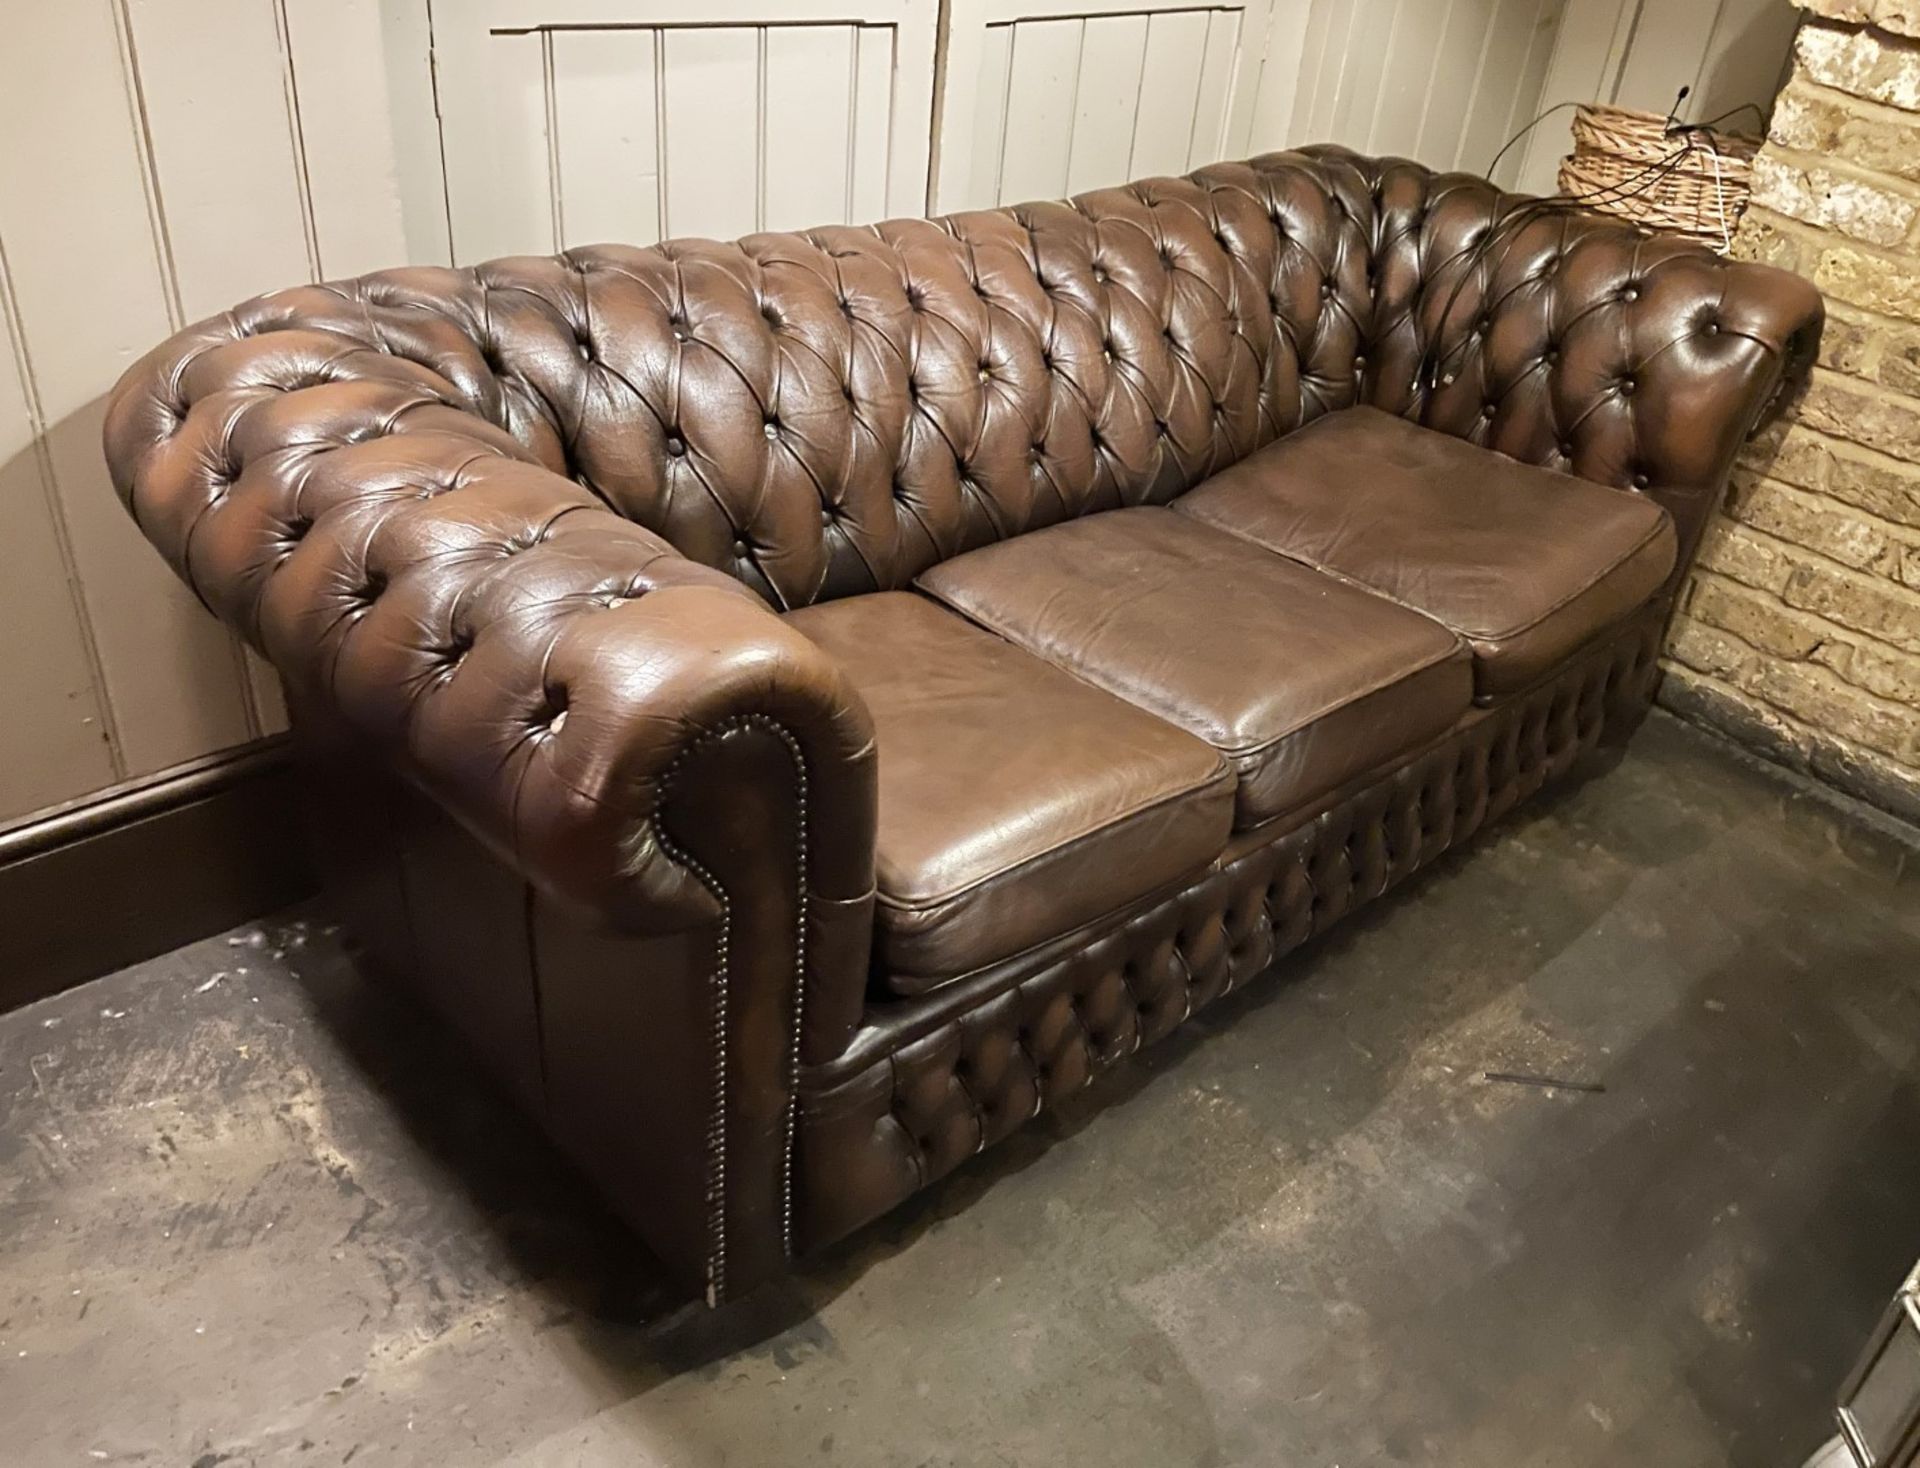 1 x Vintage Premium Handmade Brown Leather Button-back Chesterfield 3-Seater Studded Sofa - Image 5 of 8